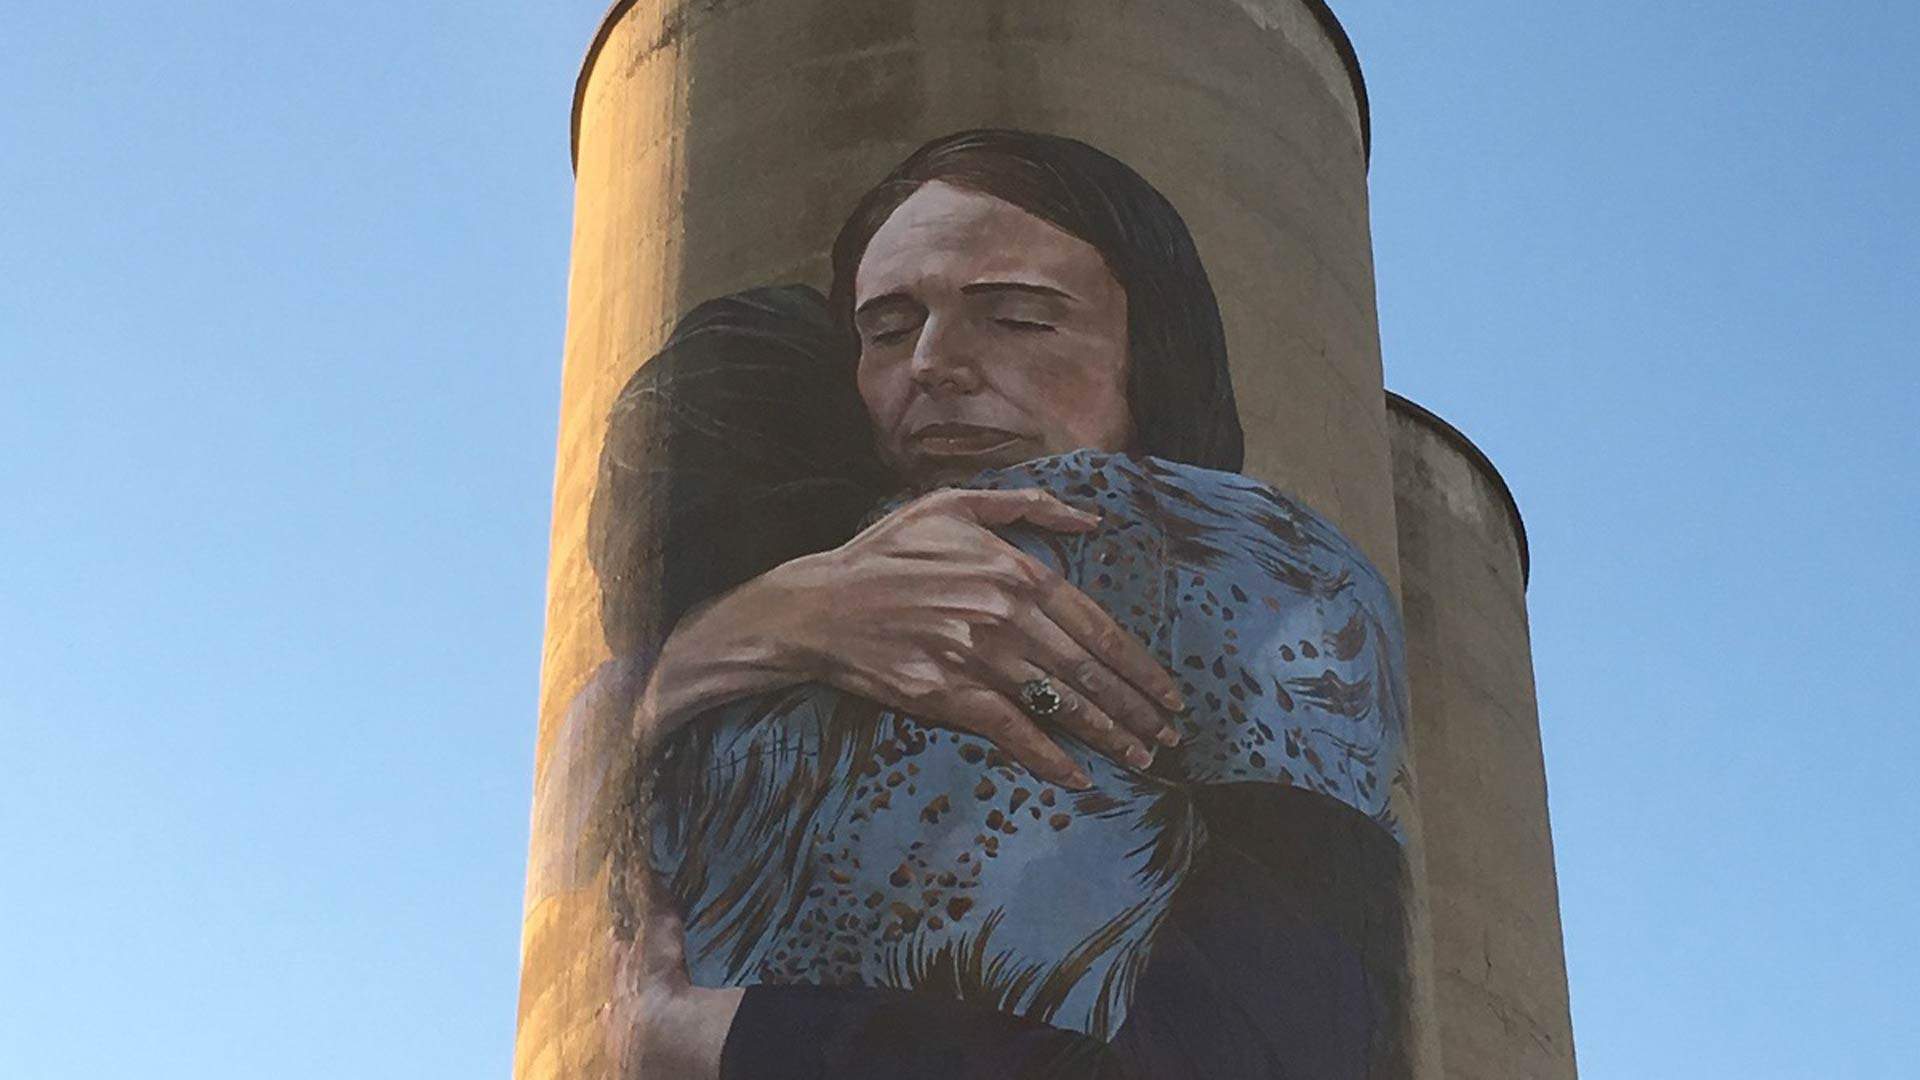 A Huge Mural of New Zealand Prime Minister Jacinda Ardern Is Now Gracing a Melbourne Silo